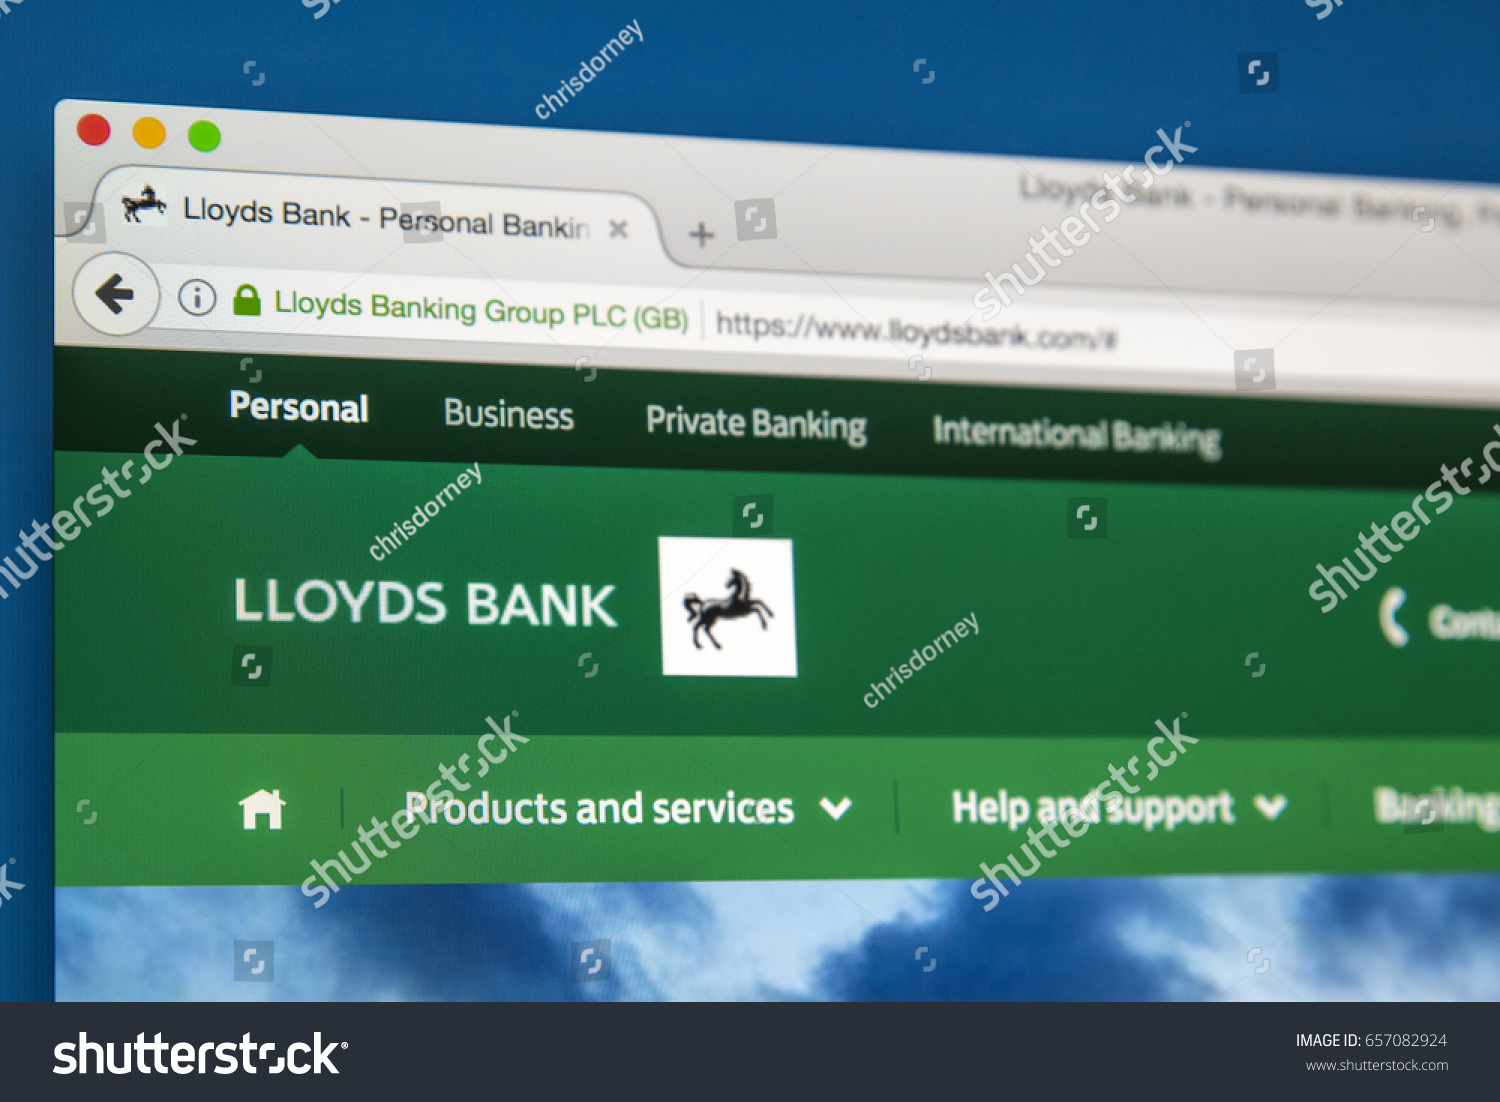 Lloyds Bank Merges Fi And International With New Gtb Head Global